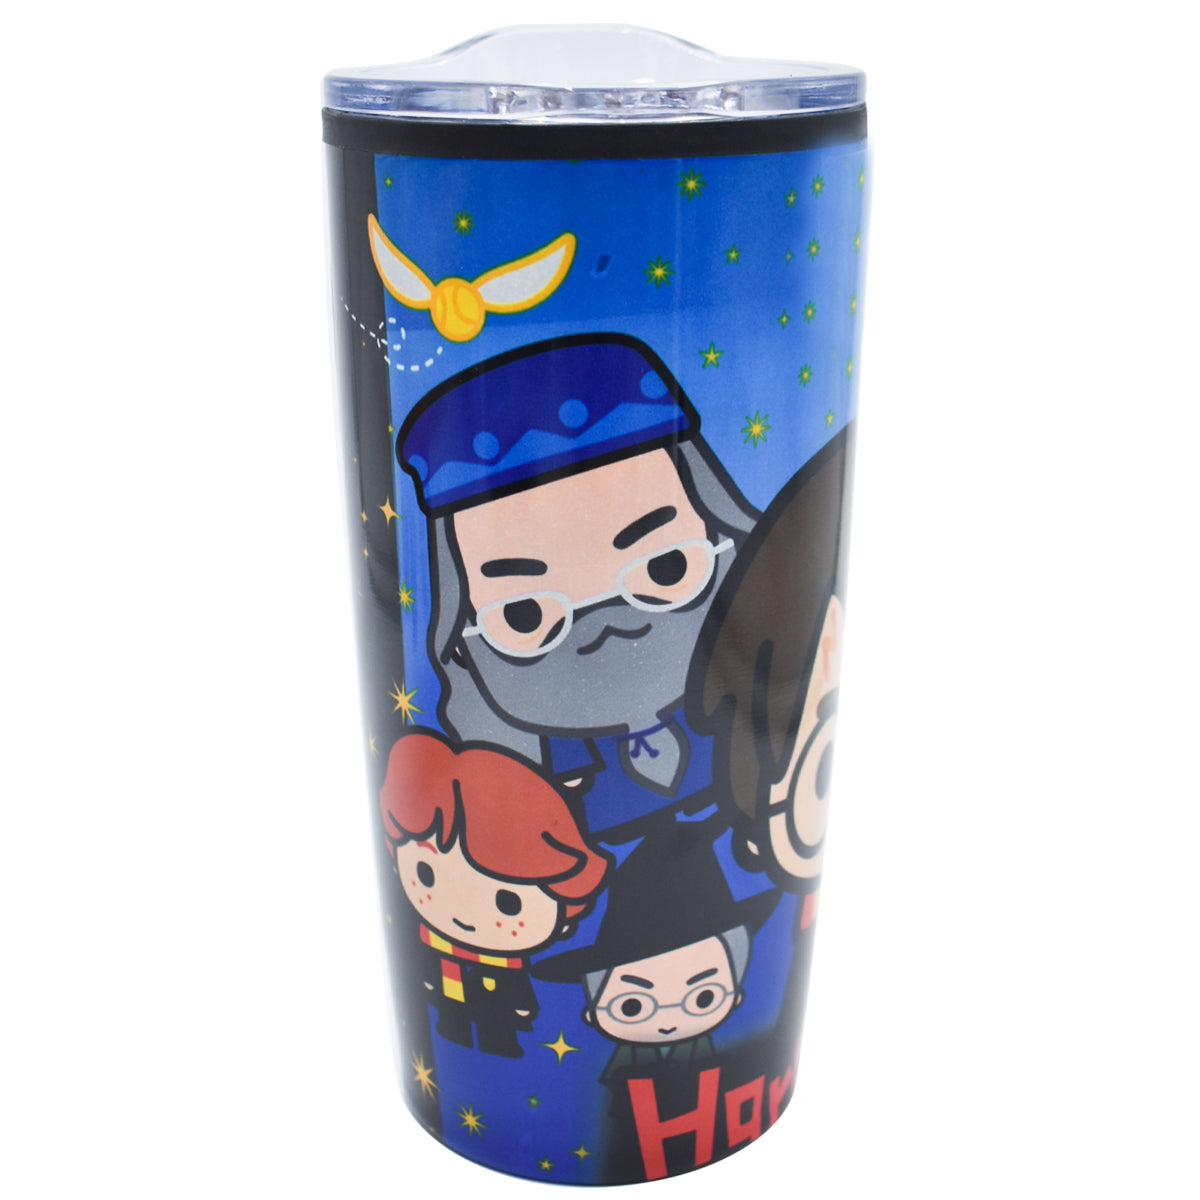 TERMO DOBLE PARED HARRY POTTER 450 ML